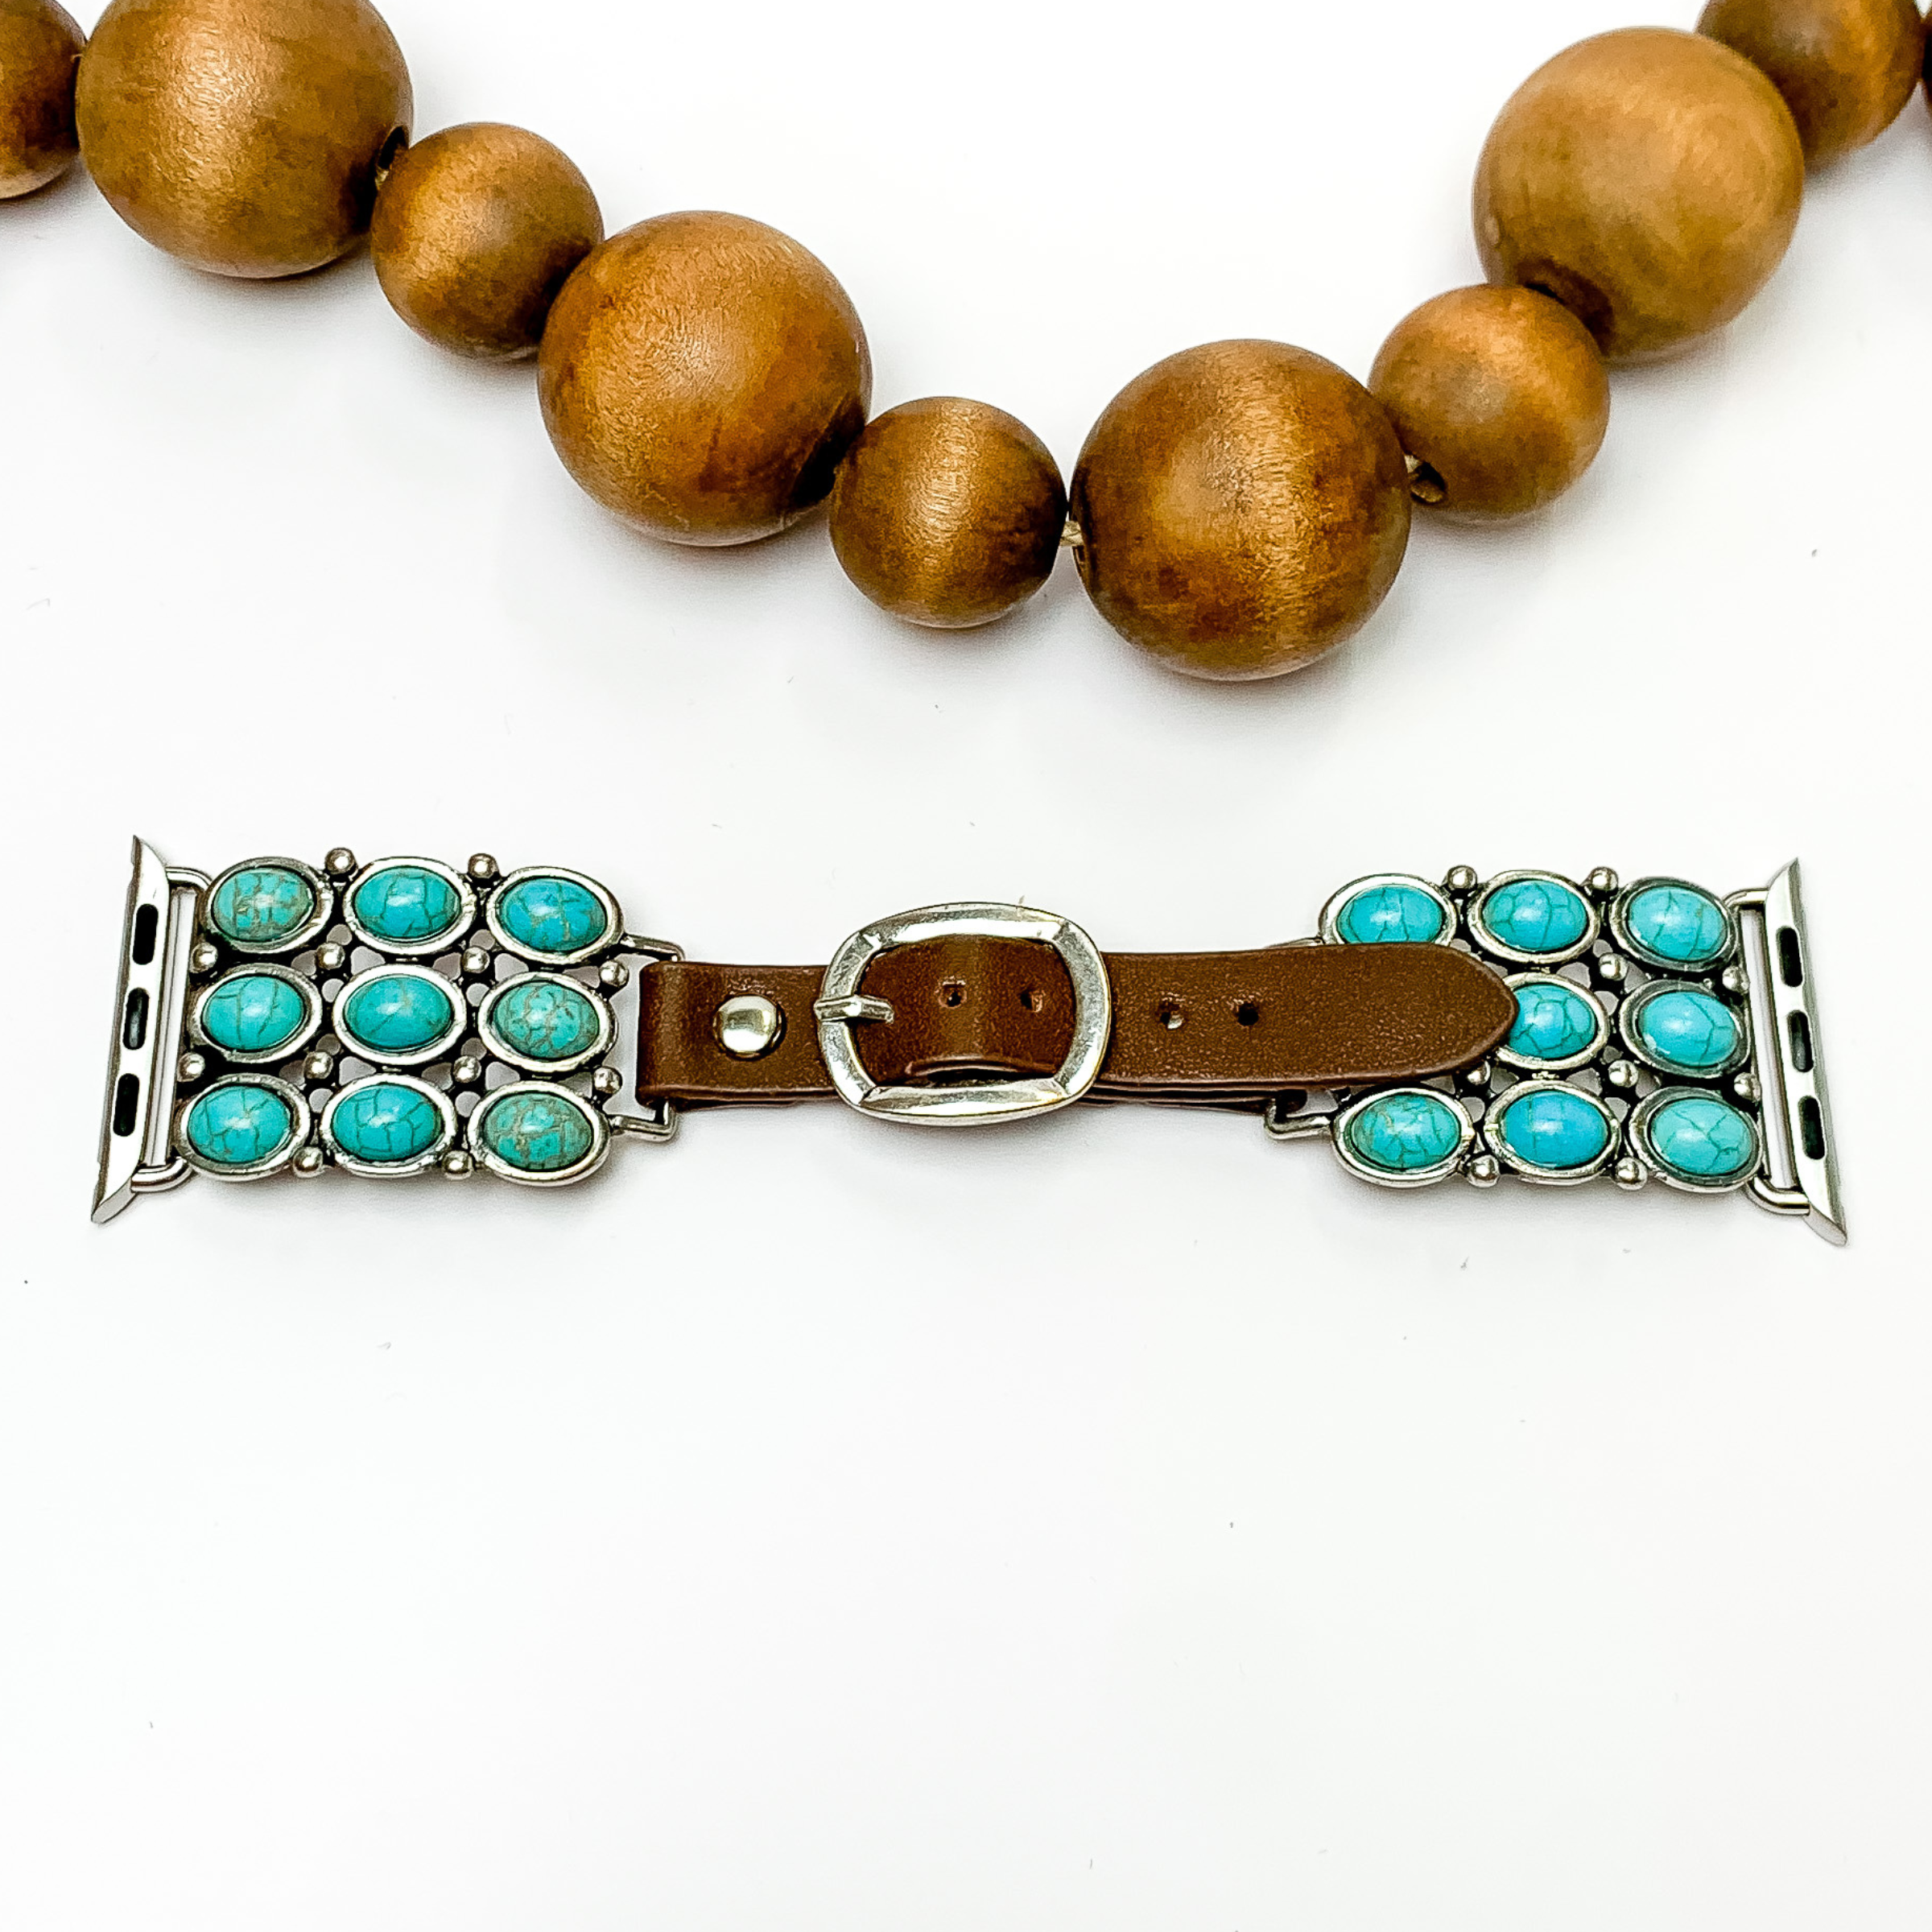 Dark Brown watch band with silver, square ends and nine turquoise stones with Apple watch band acessories. This watch band is pictured on a white background with brown beads underneath the band. 